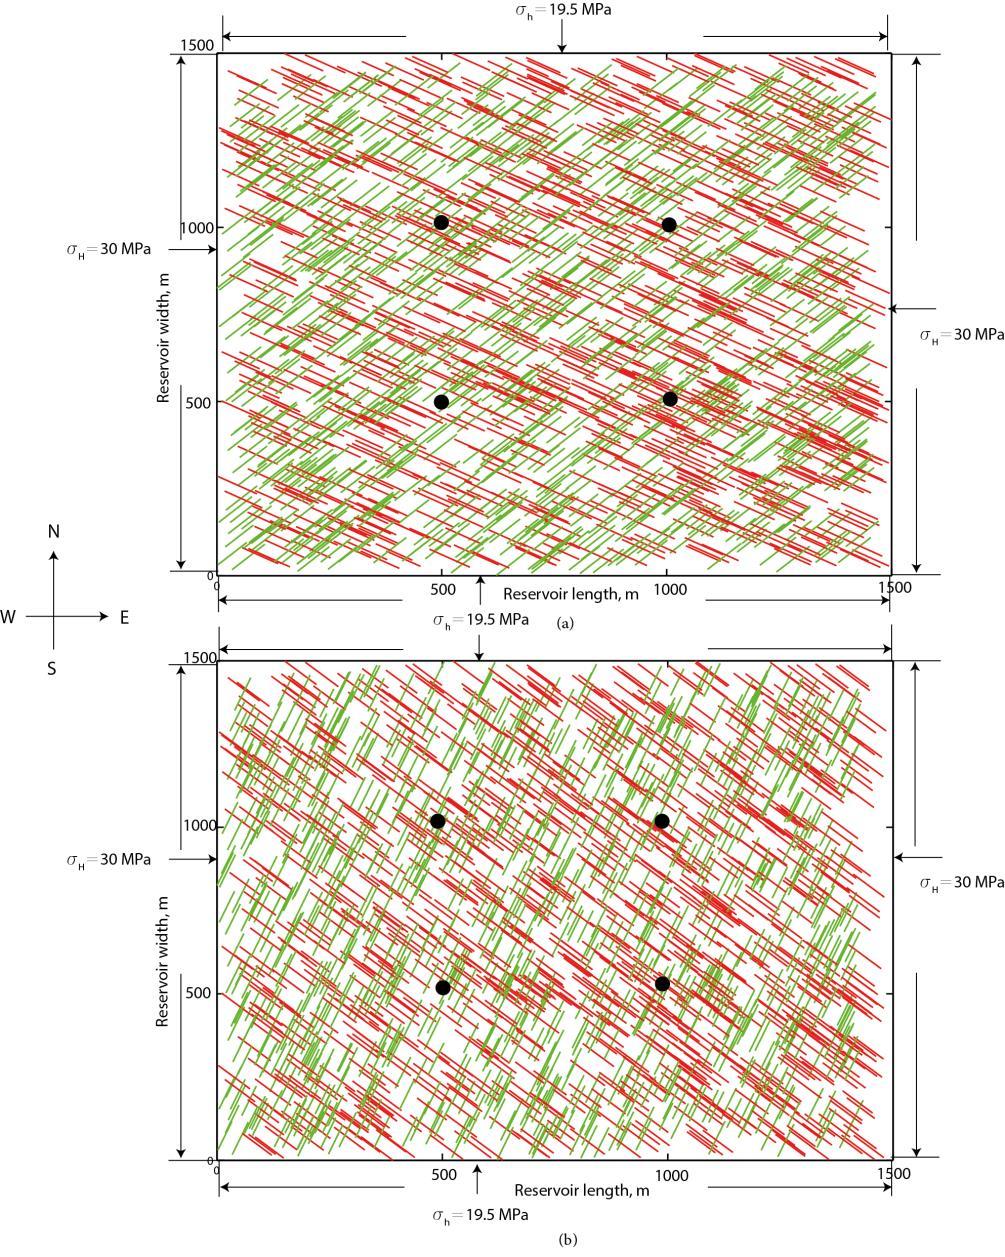 Figure 4-1 (a) Discrete fracture network distribution with orientations striking 045 and 120 degrees with respect to the North, (b) and a second discrete fracture network distribution